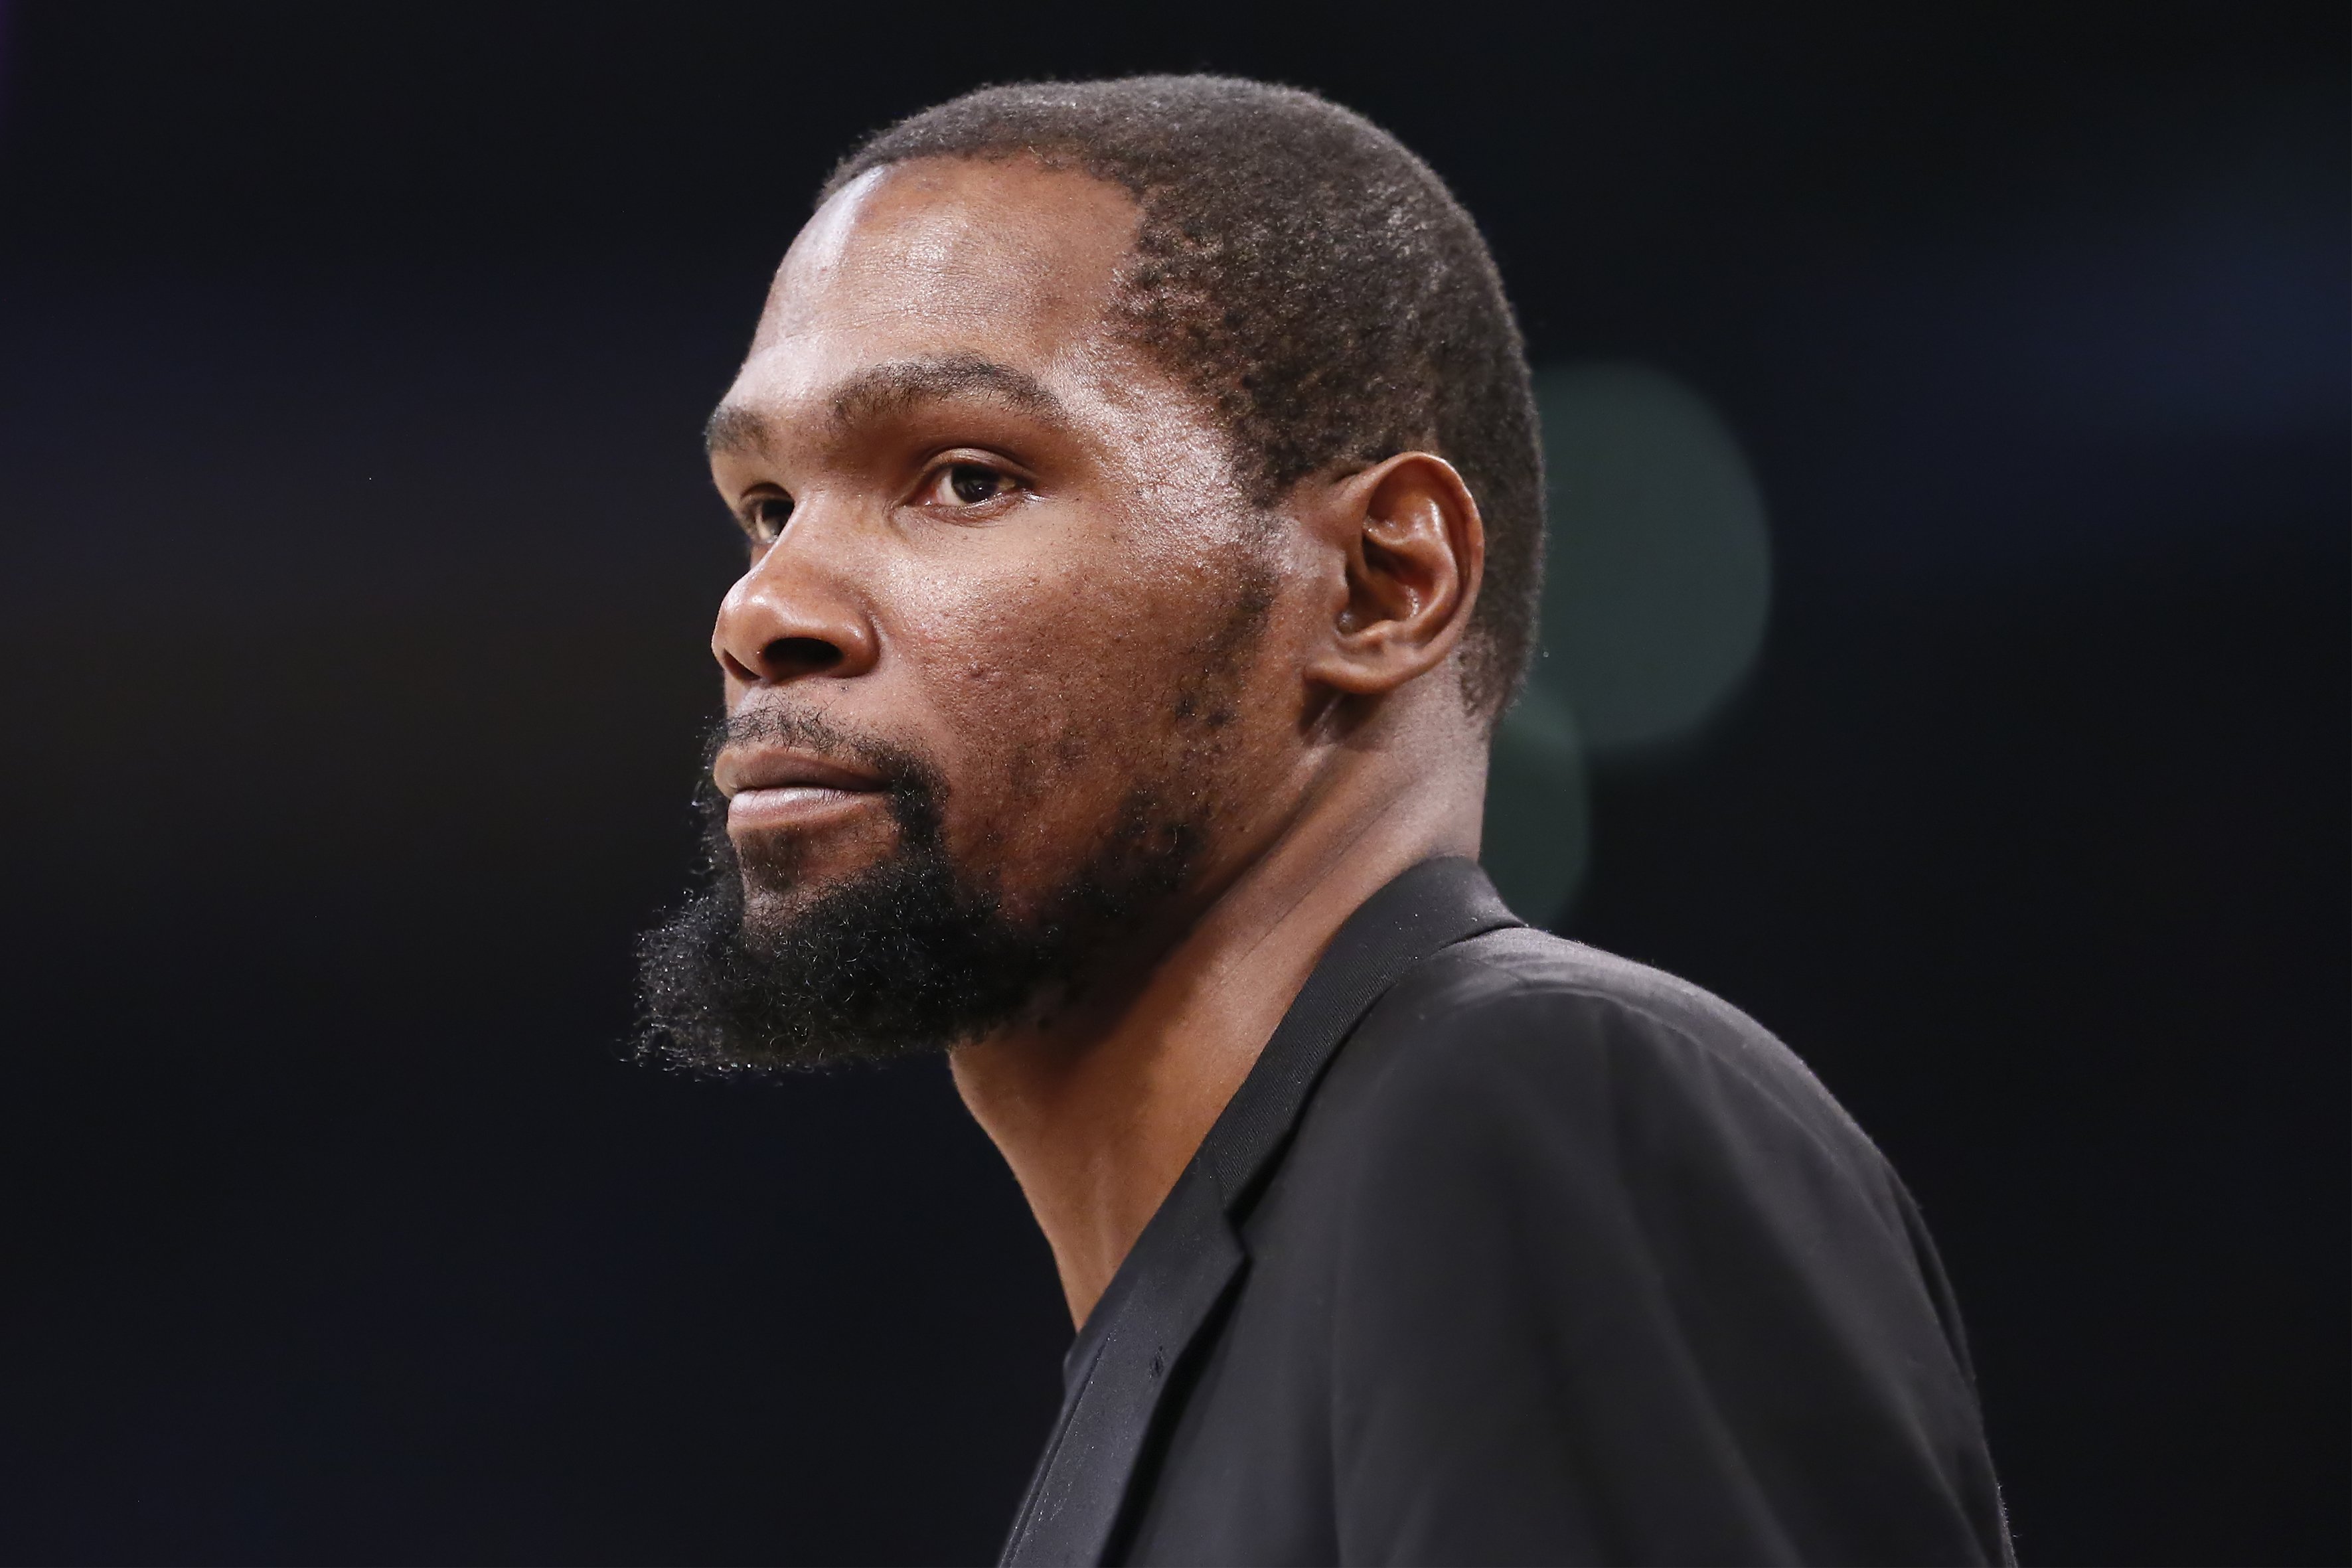  Kevin Durant looks on during a game at the Staples Center on March 10, 2020 in Los Angeles, CA | Photo: GettyImages